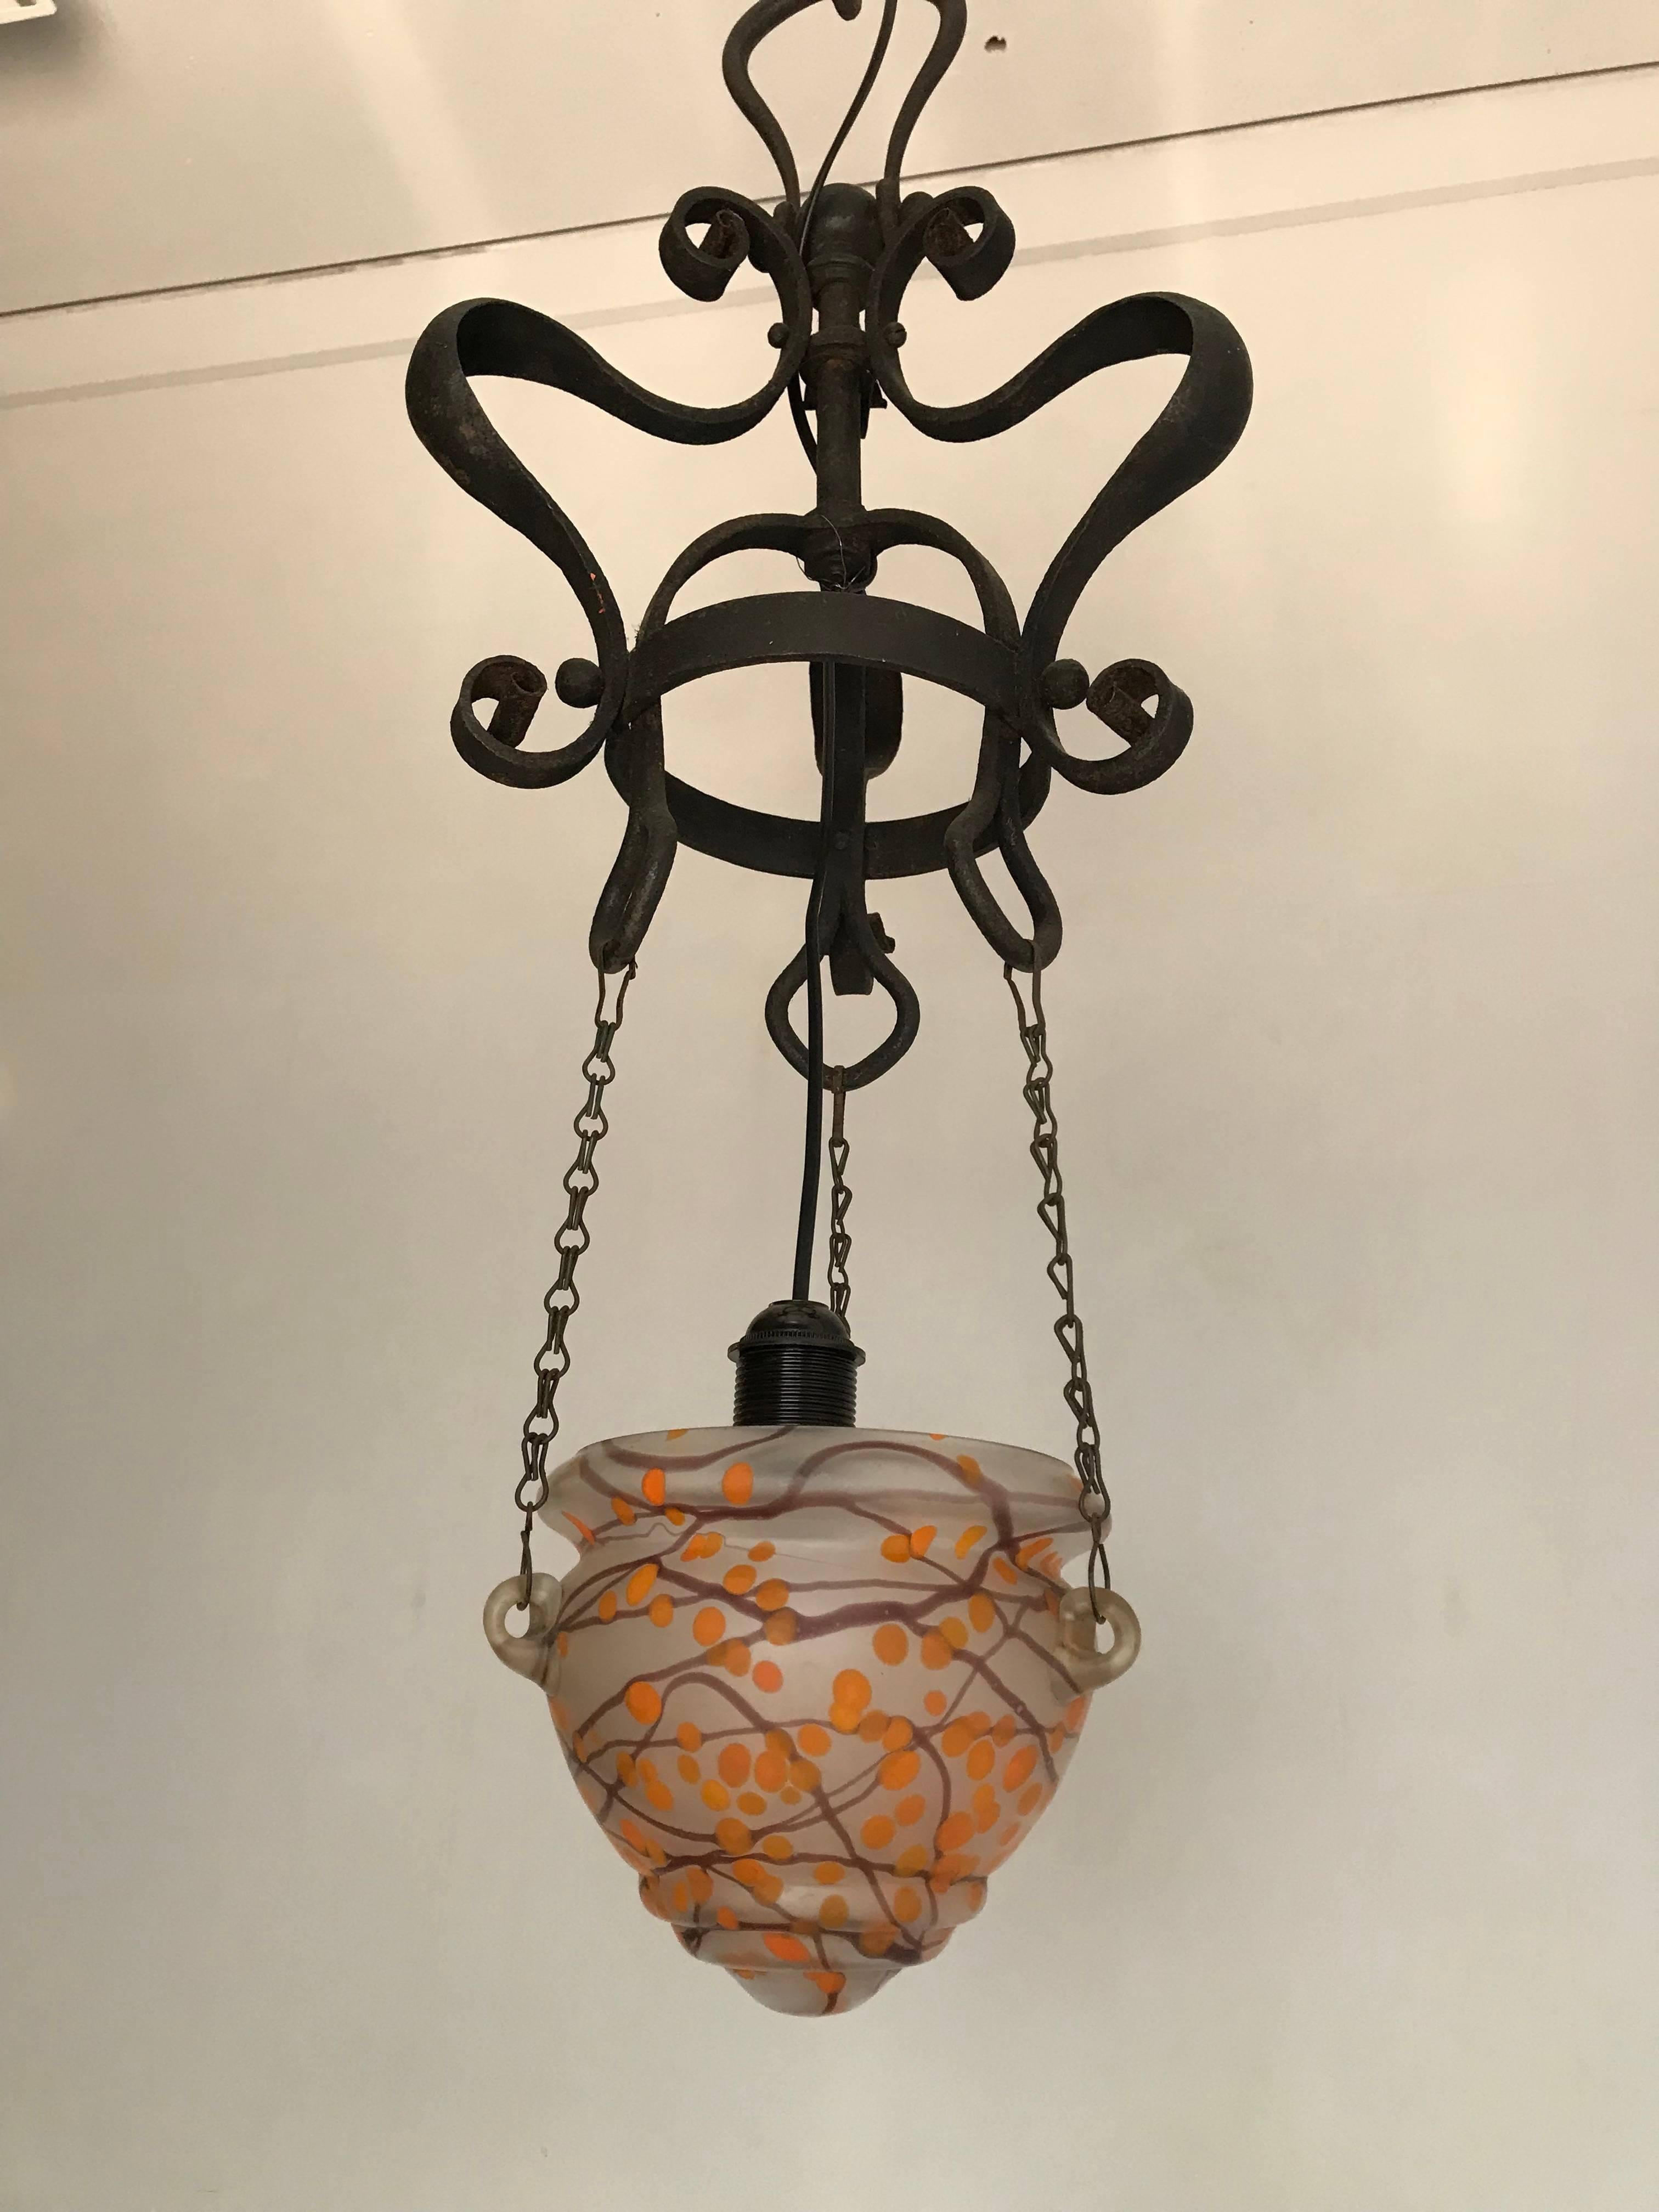 Pure and elegant work of lighting art from the turn of the century.

The handforged and extremely elegant shape of the wrought iron top of this pendant is litereally like the crown on top. The perfect symmetry and the perfect curves in the wrought